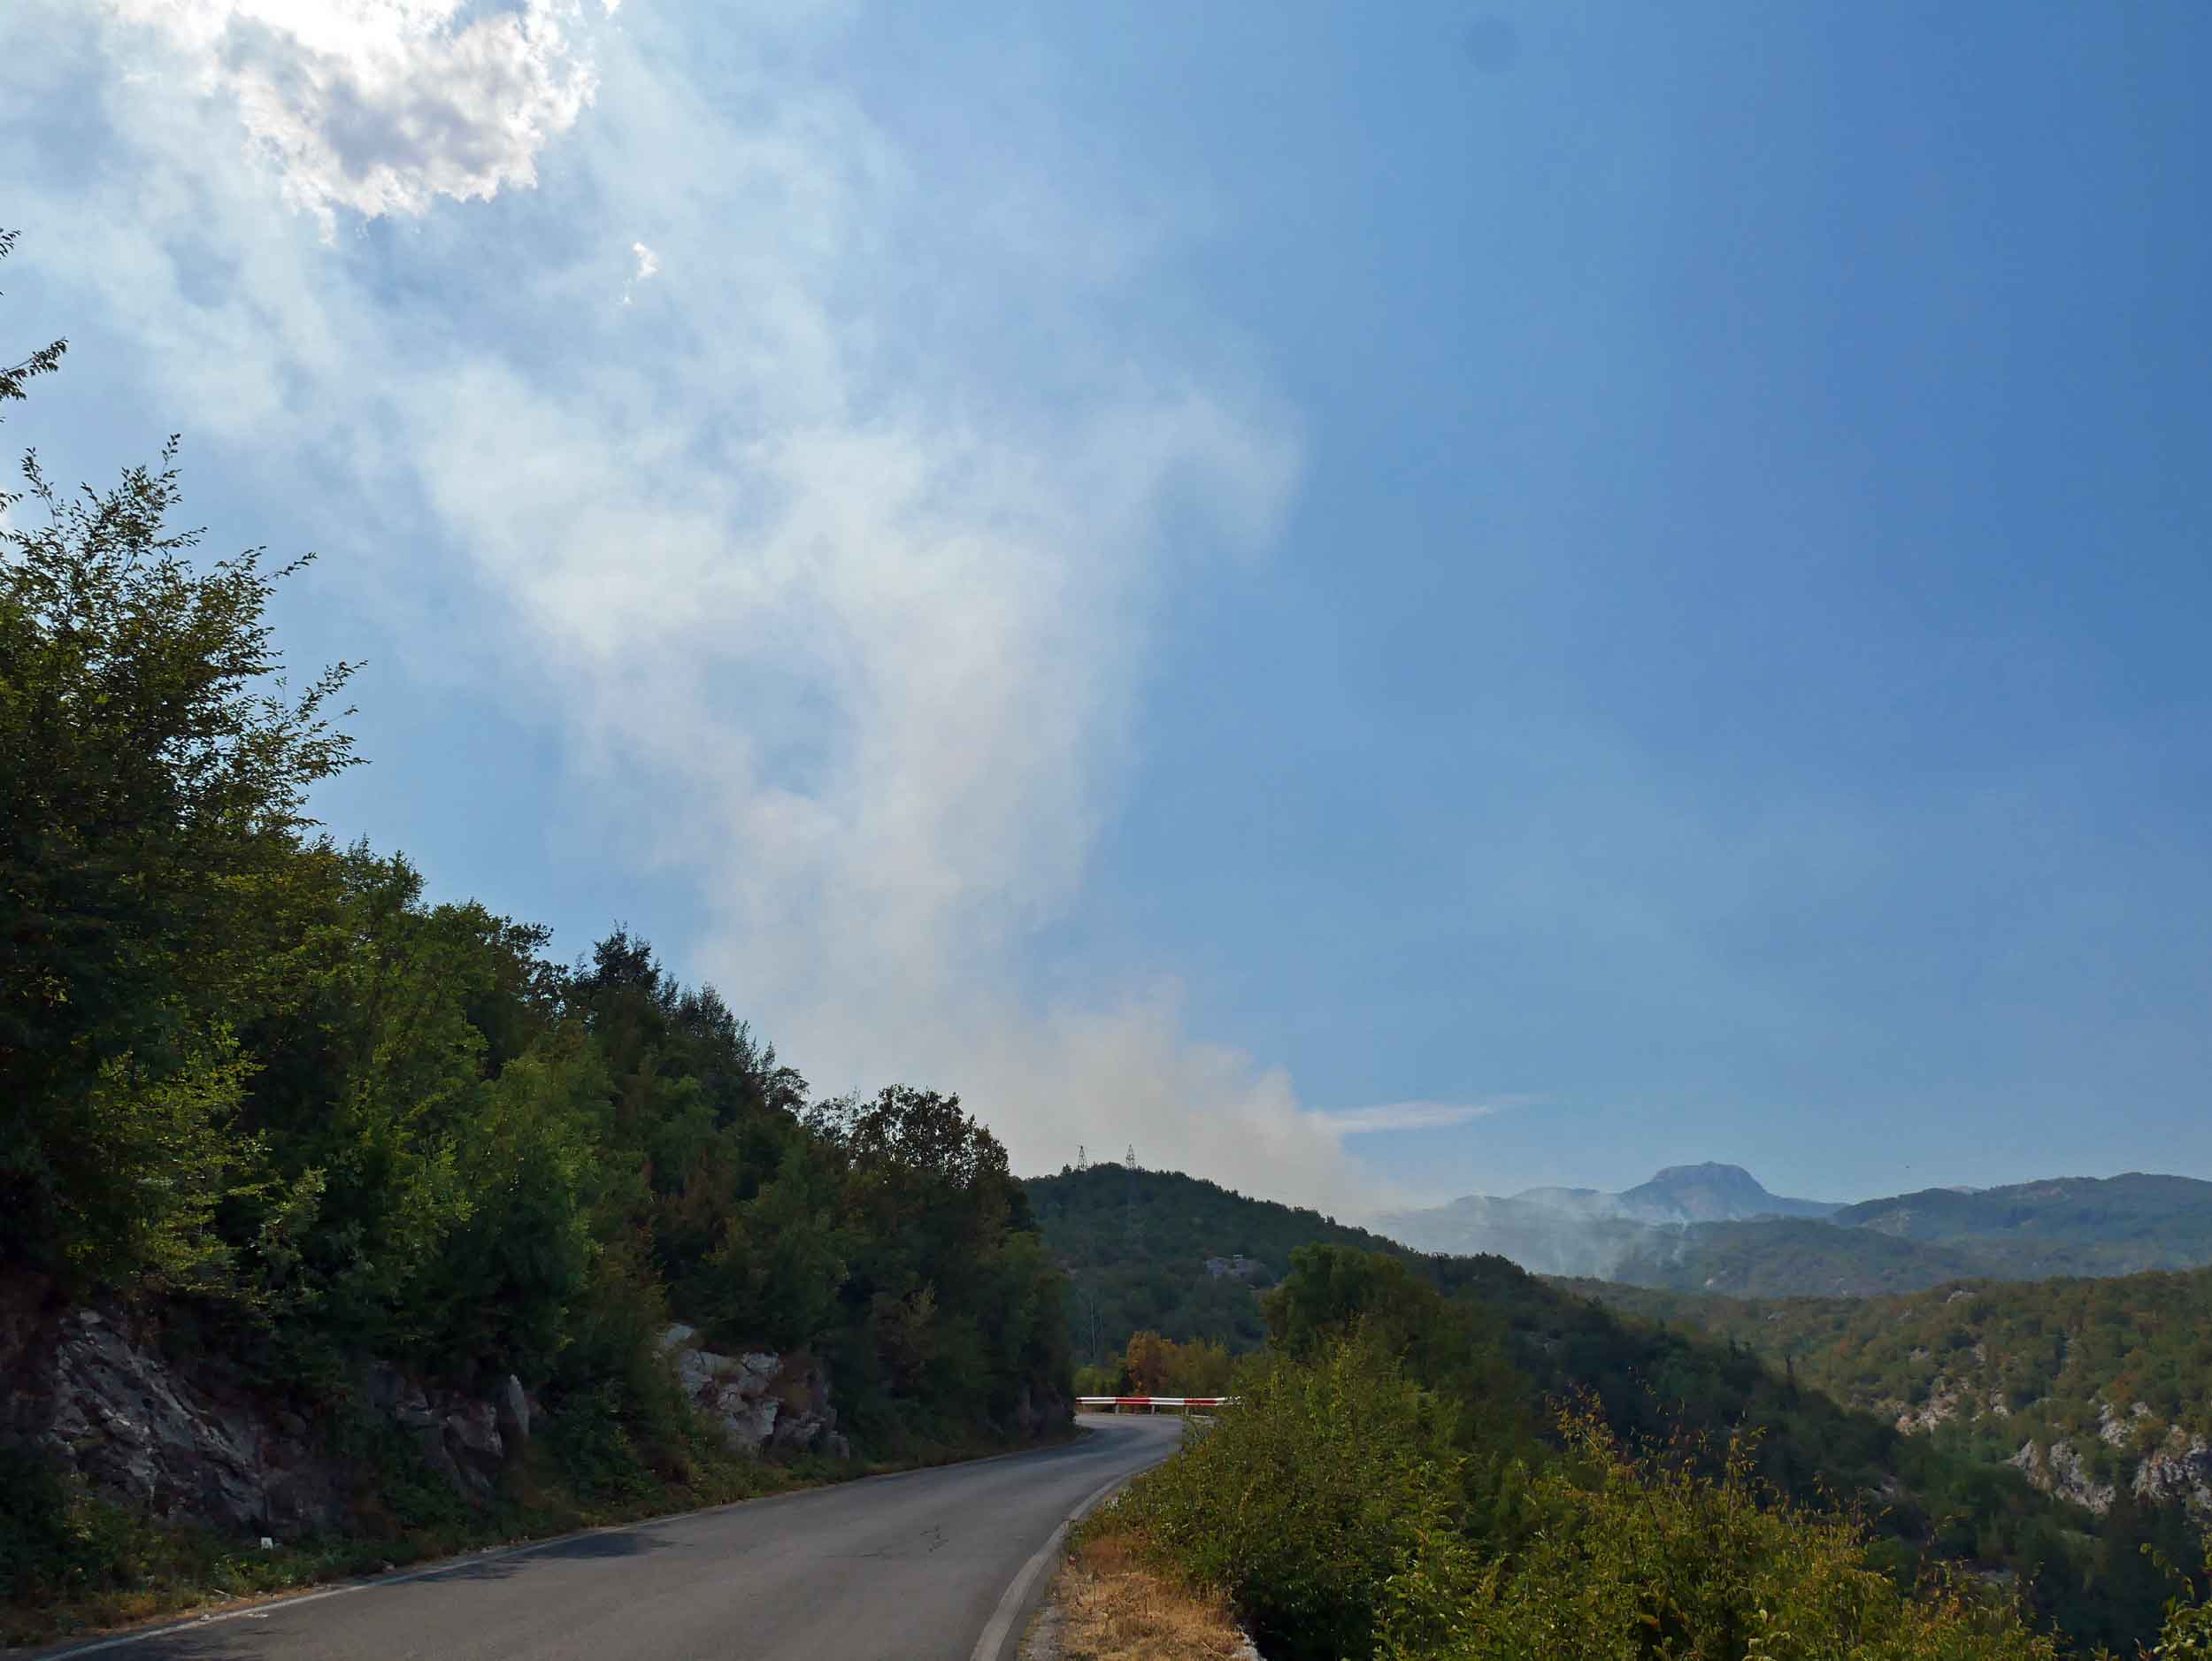  From Montenegro's coast, we drove up into the interior near the former capital of Cetinje, which was surrounded by burning forest and smokey hills because of drought and heat.&nbsp; 